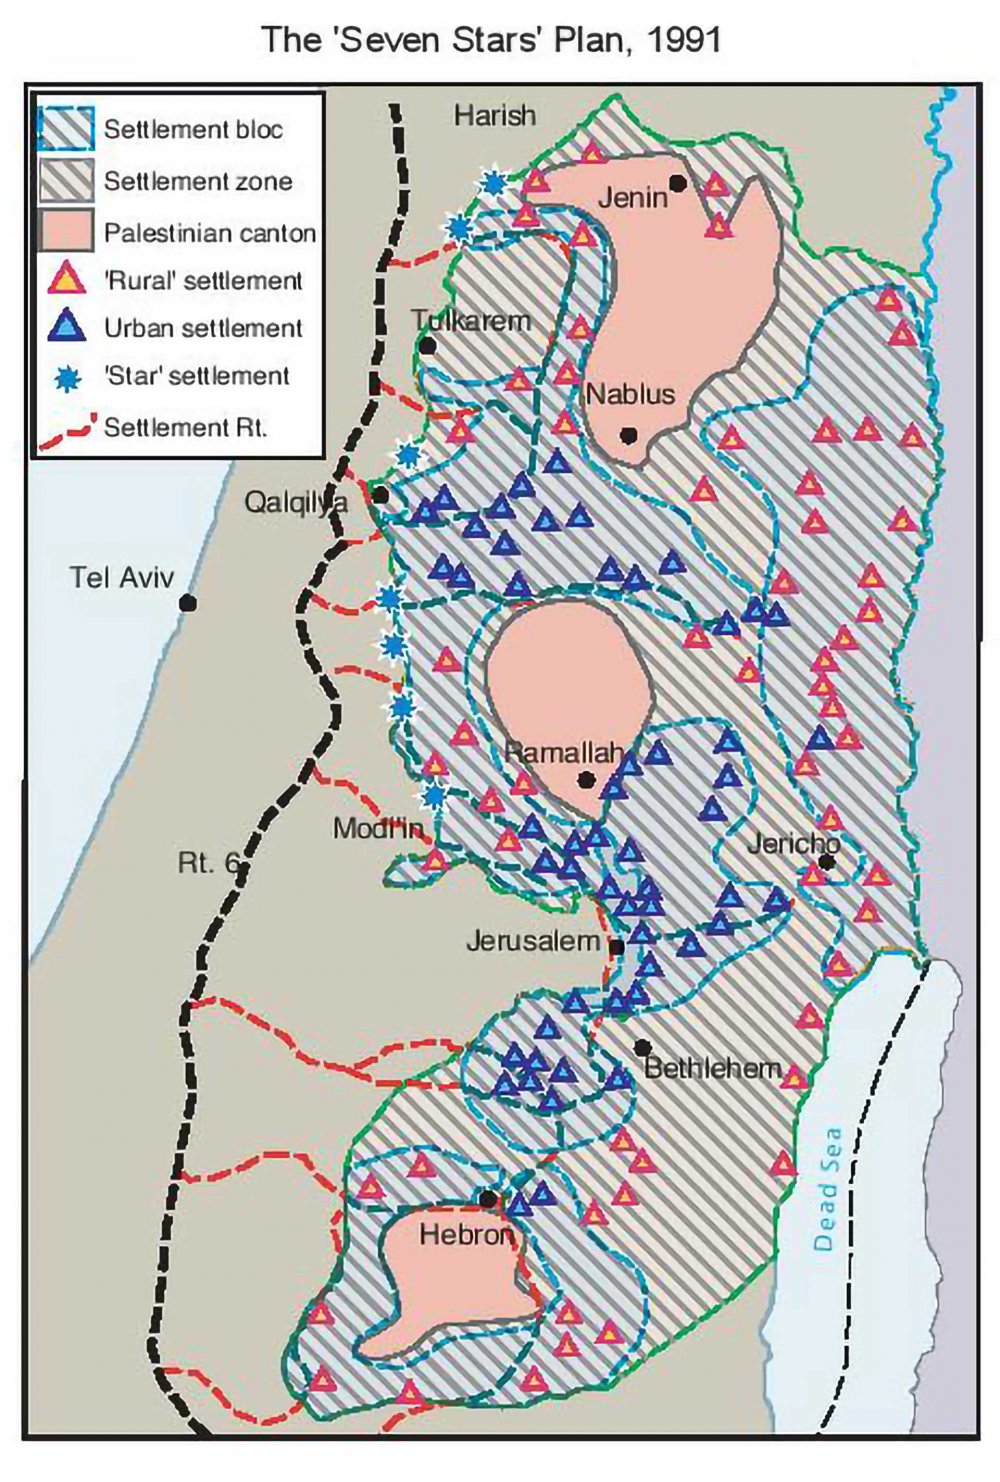 The Seven Stars plan for Jewish settlements in the West Bank, 1991